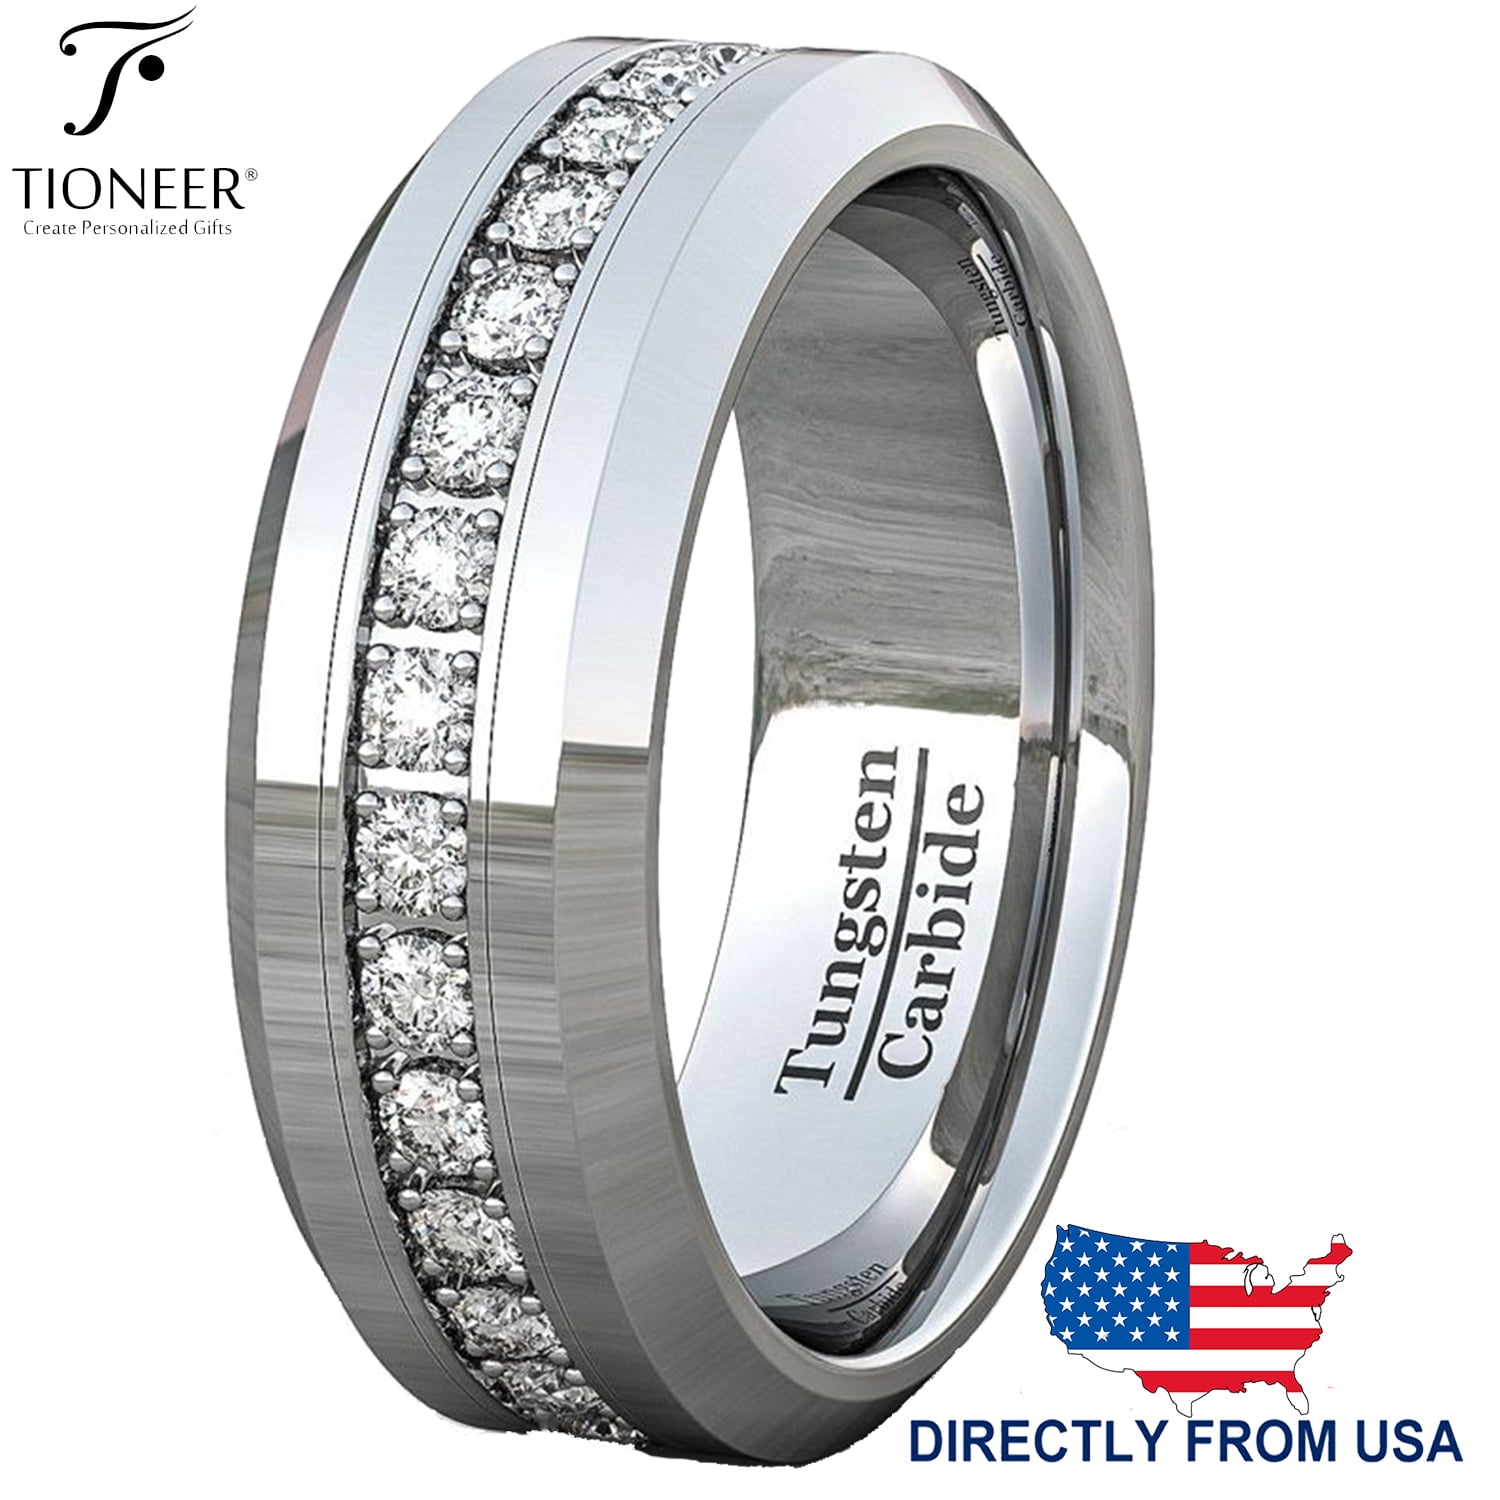 Silver Tungsten Carbide Family Love Ring 8mm Wedding Band Anniversary Ring for Men and Women Size 14